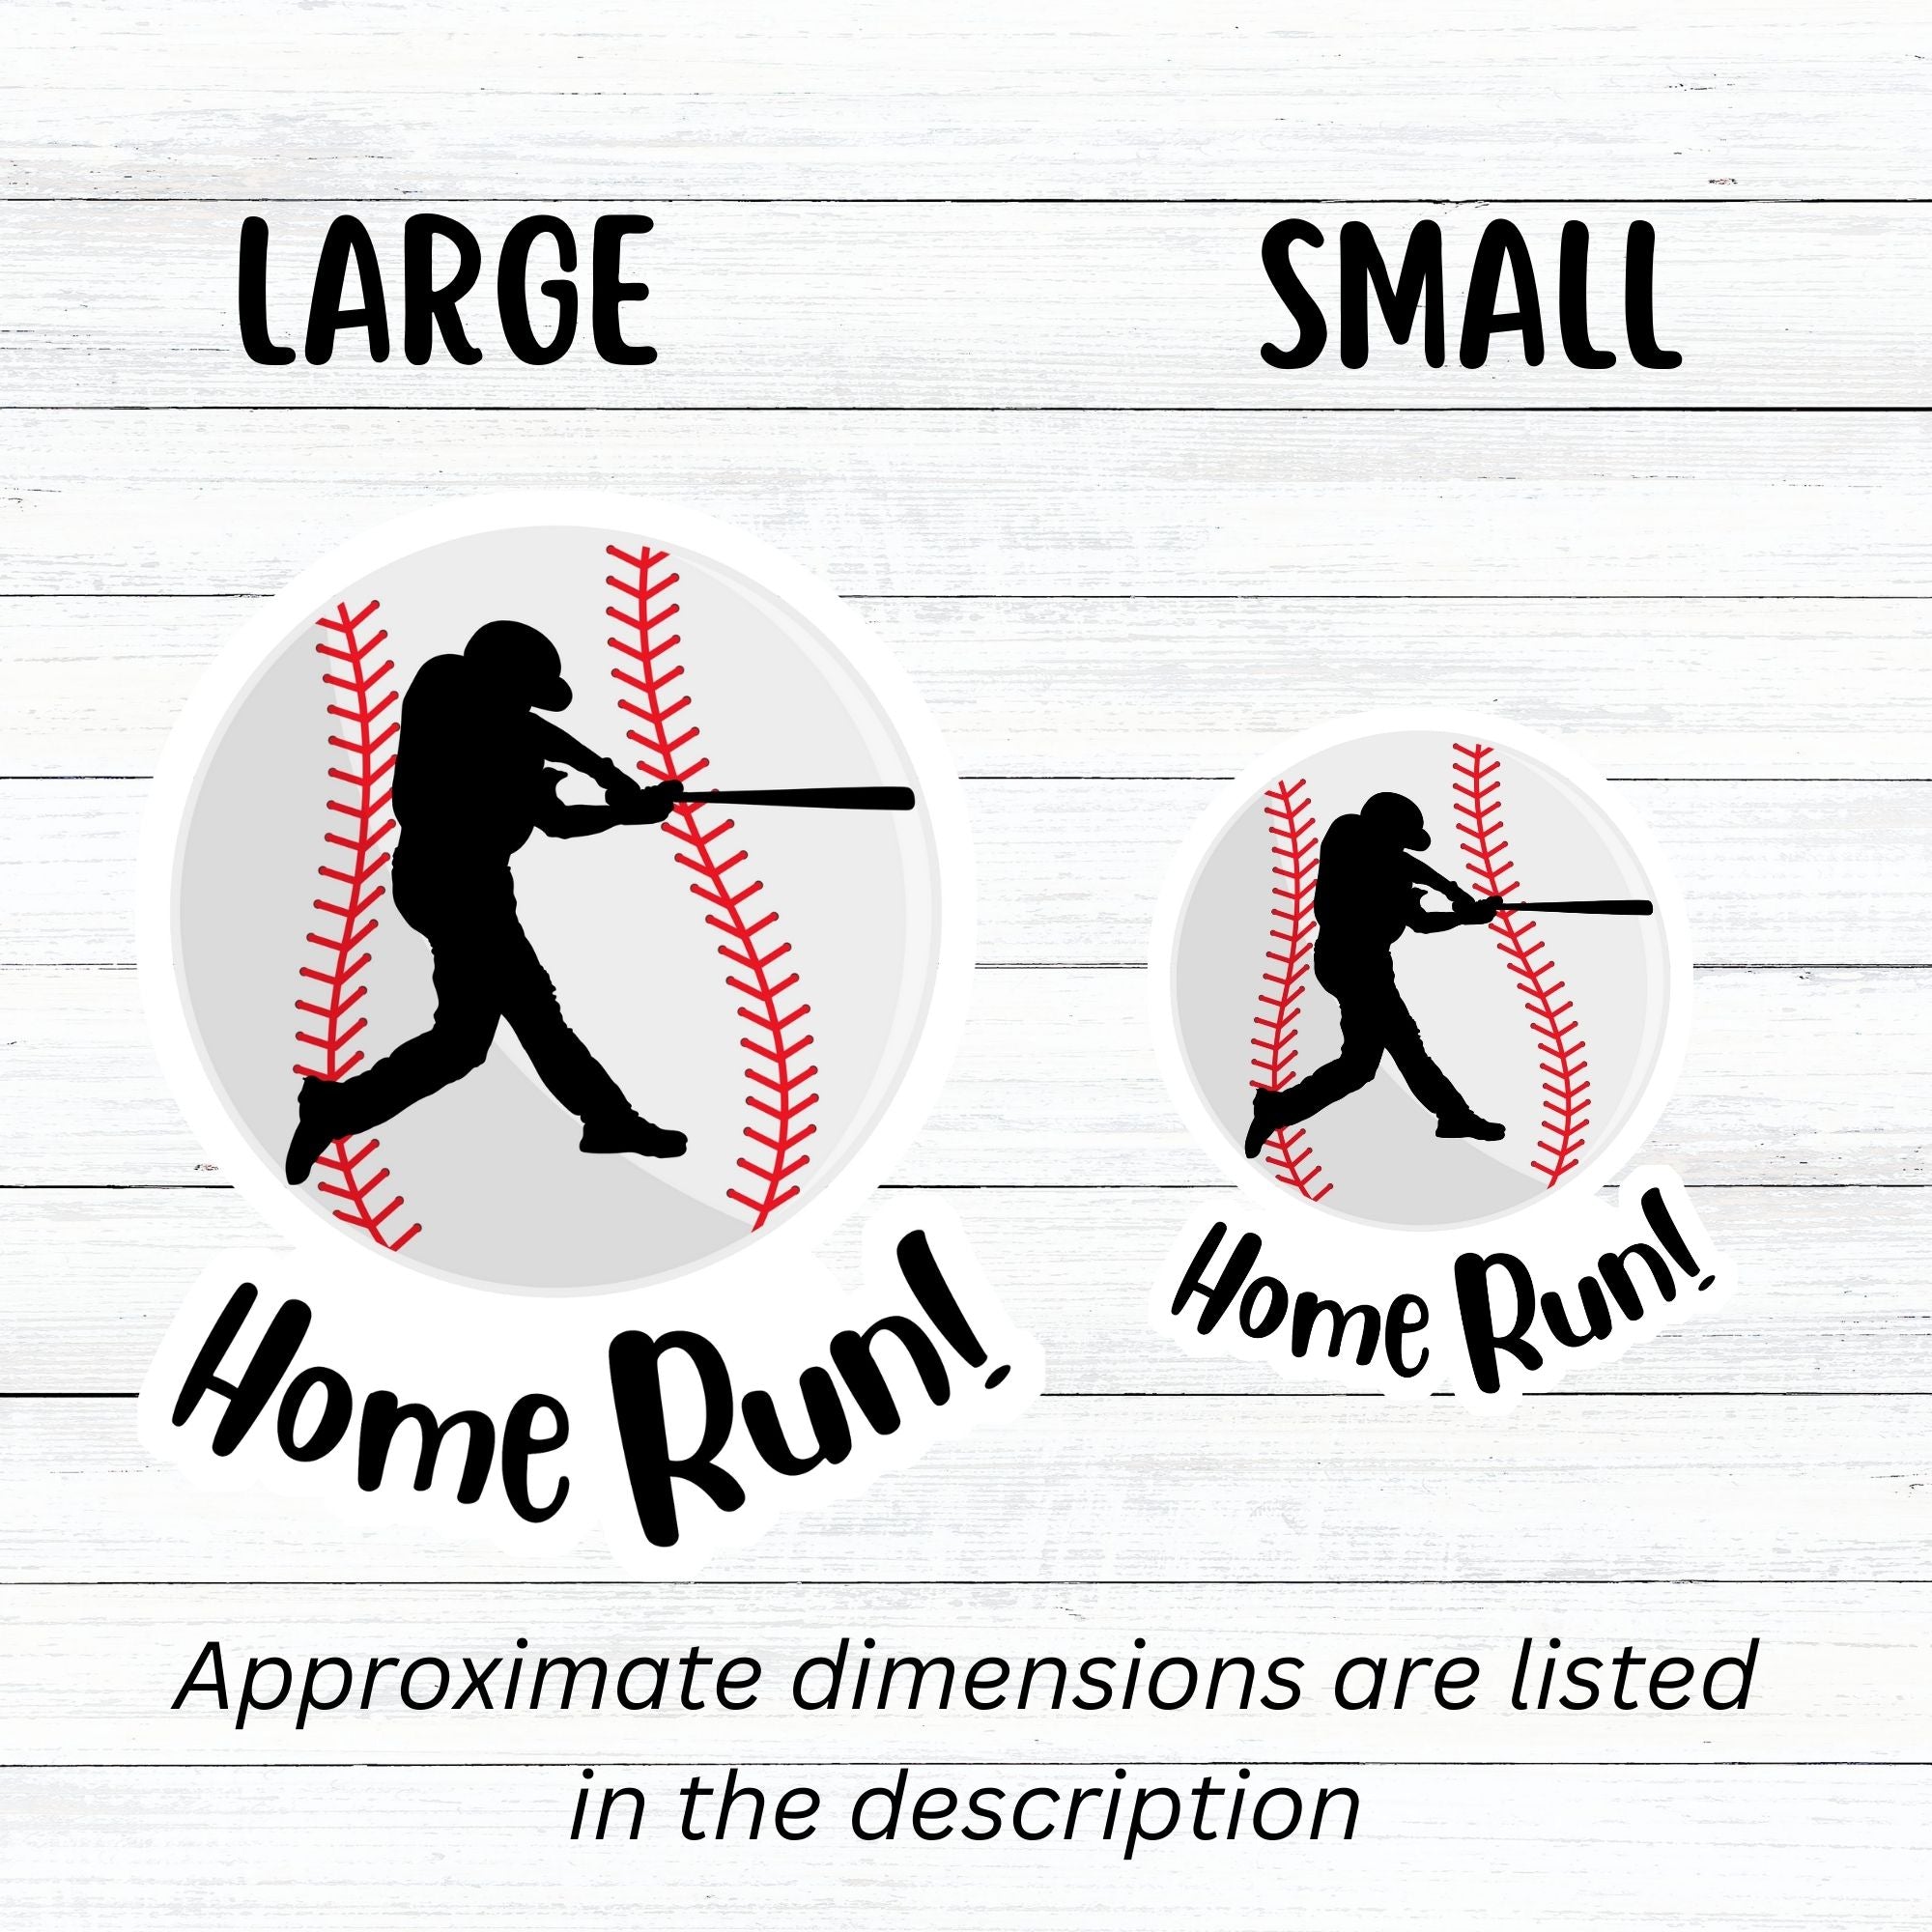 Knock it out of the park! This individual die-cut sticker features the silhouette of a baseball player swinging a bat, on a background of a baseball, with the word "Homerun!" below. This image shows the large and small baseball stickers next to each other..